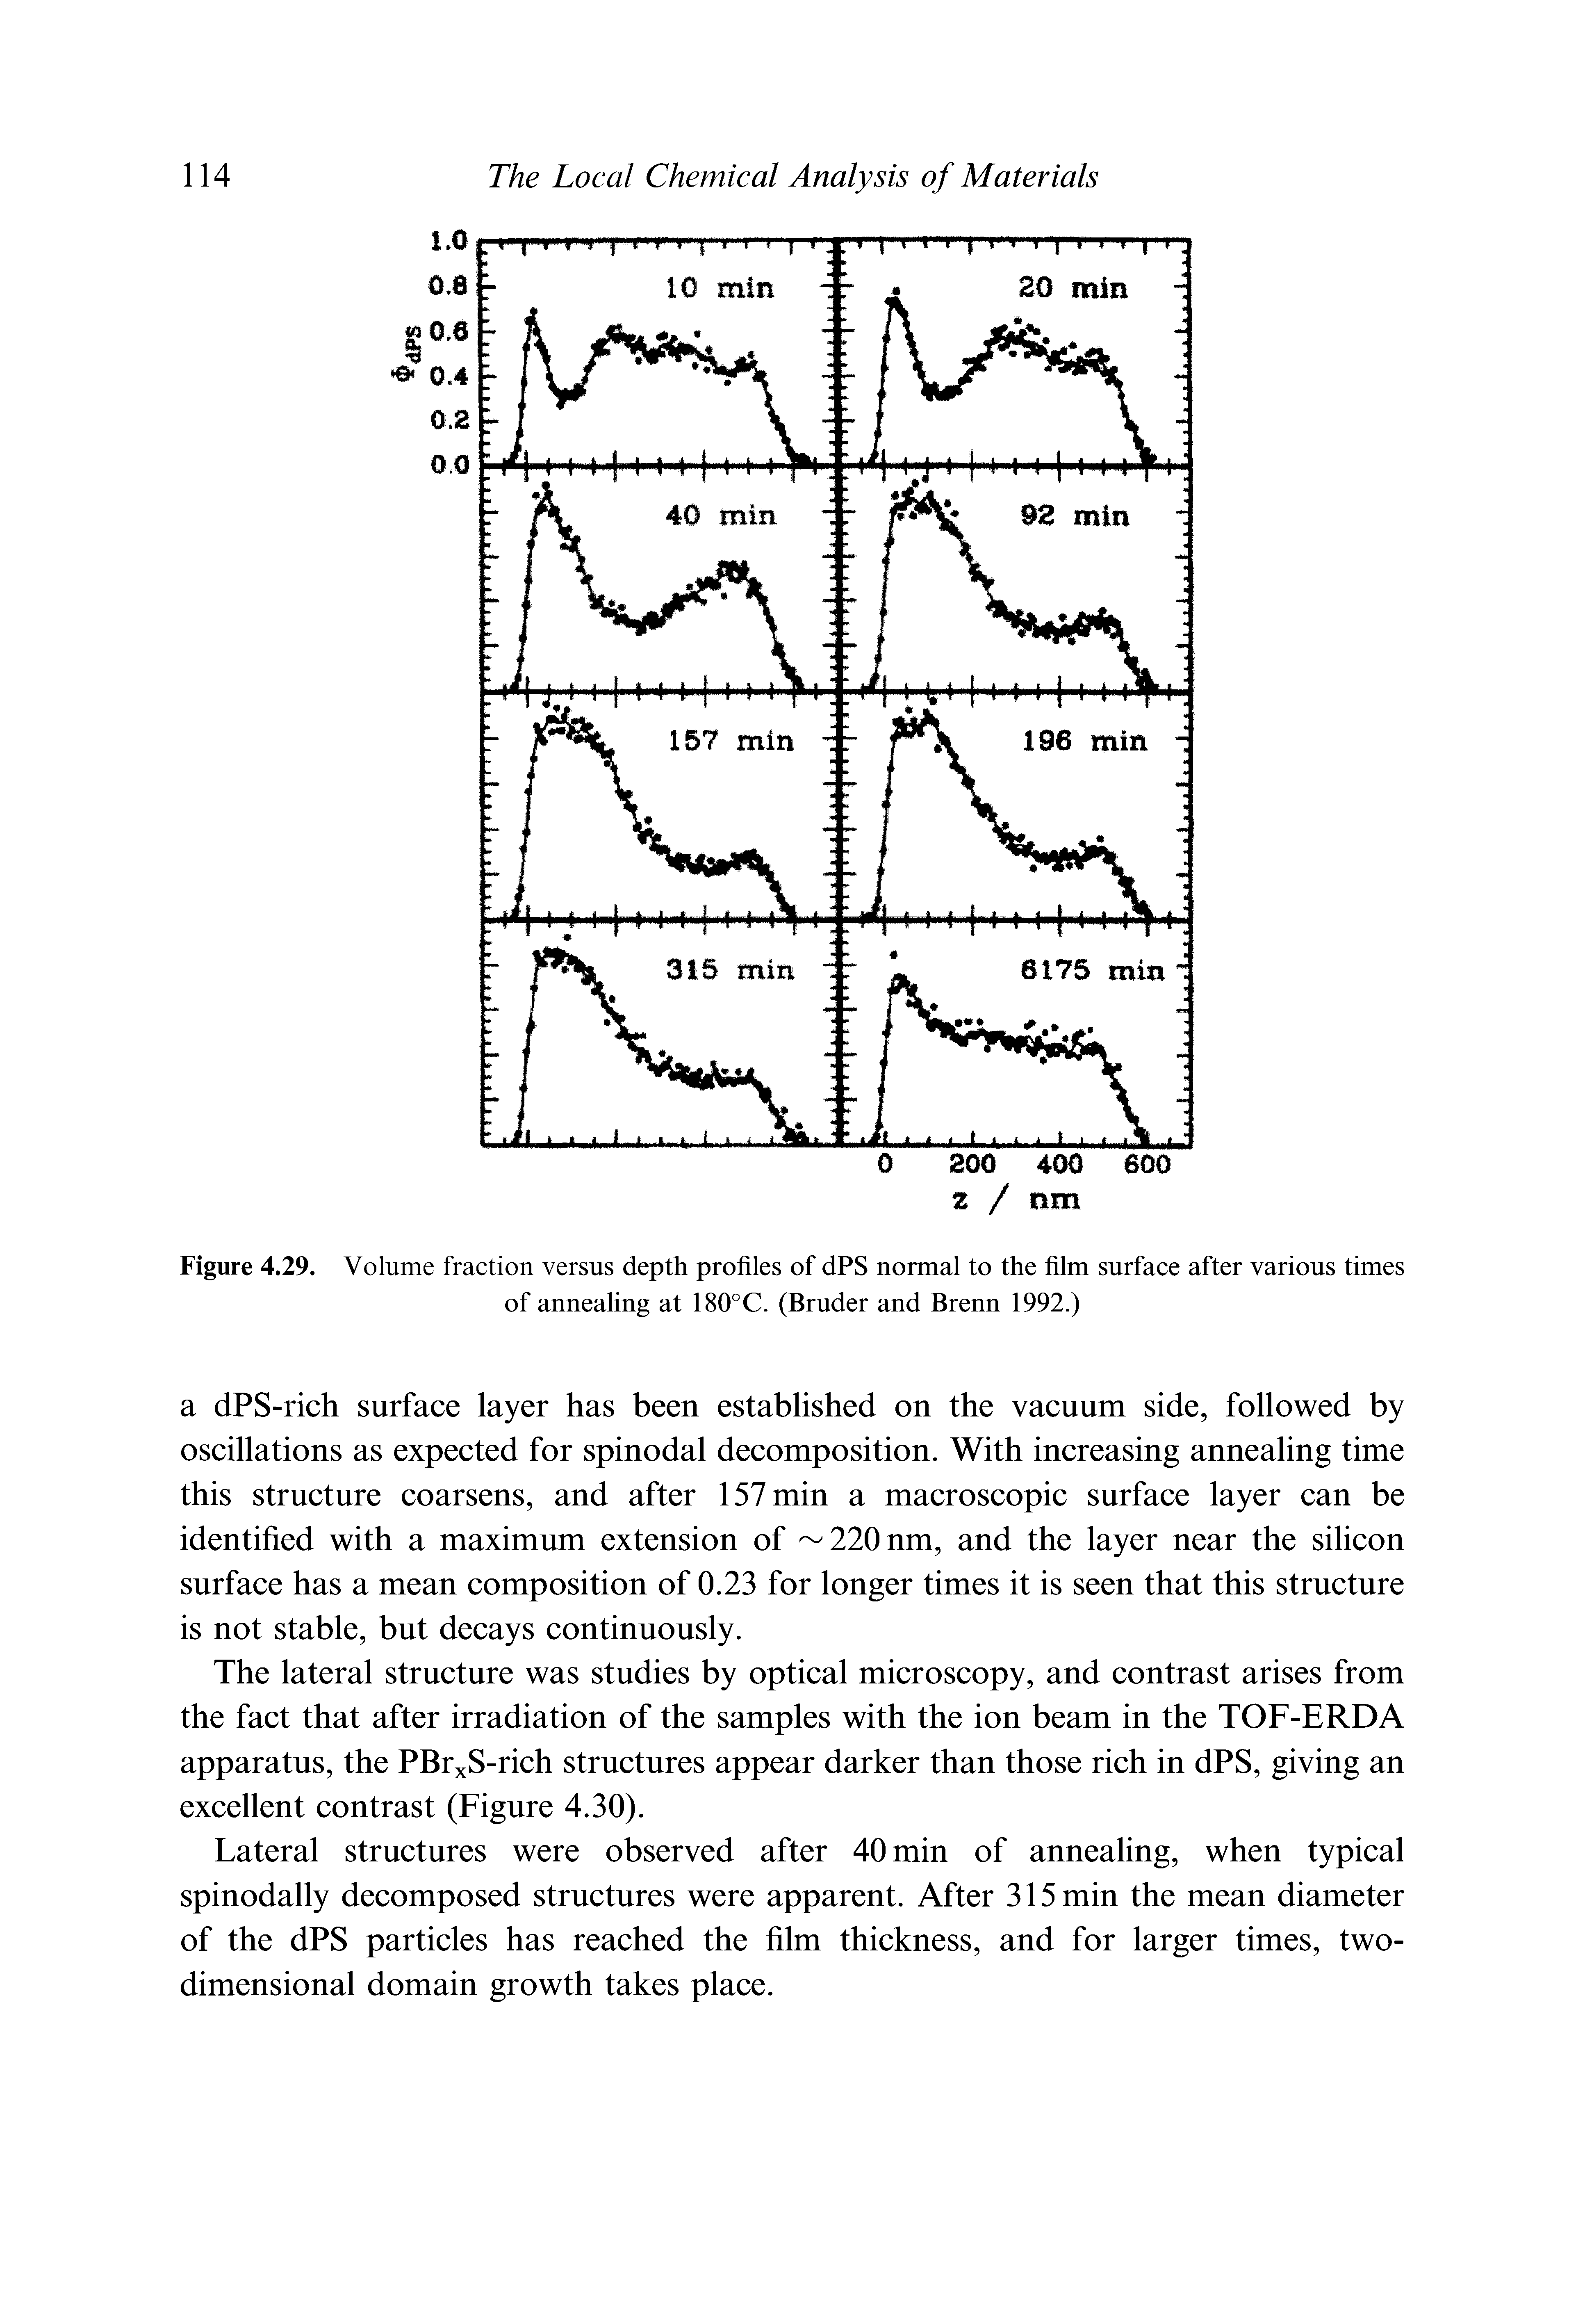 Figure 4.29. Volume fraction versus depth profiles of dPS normal to the film surface after various times of annealing at 180°C. (Bruder and Brenn 1992.)...